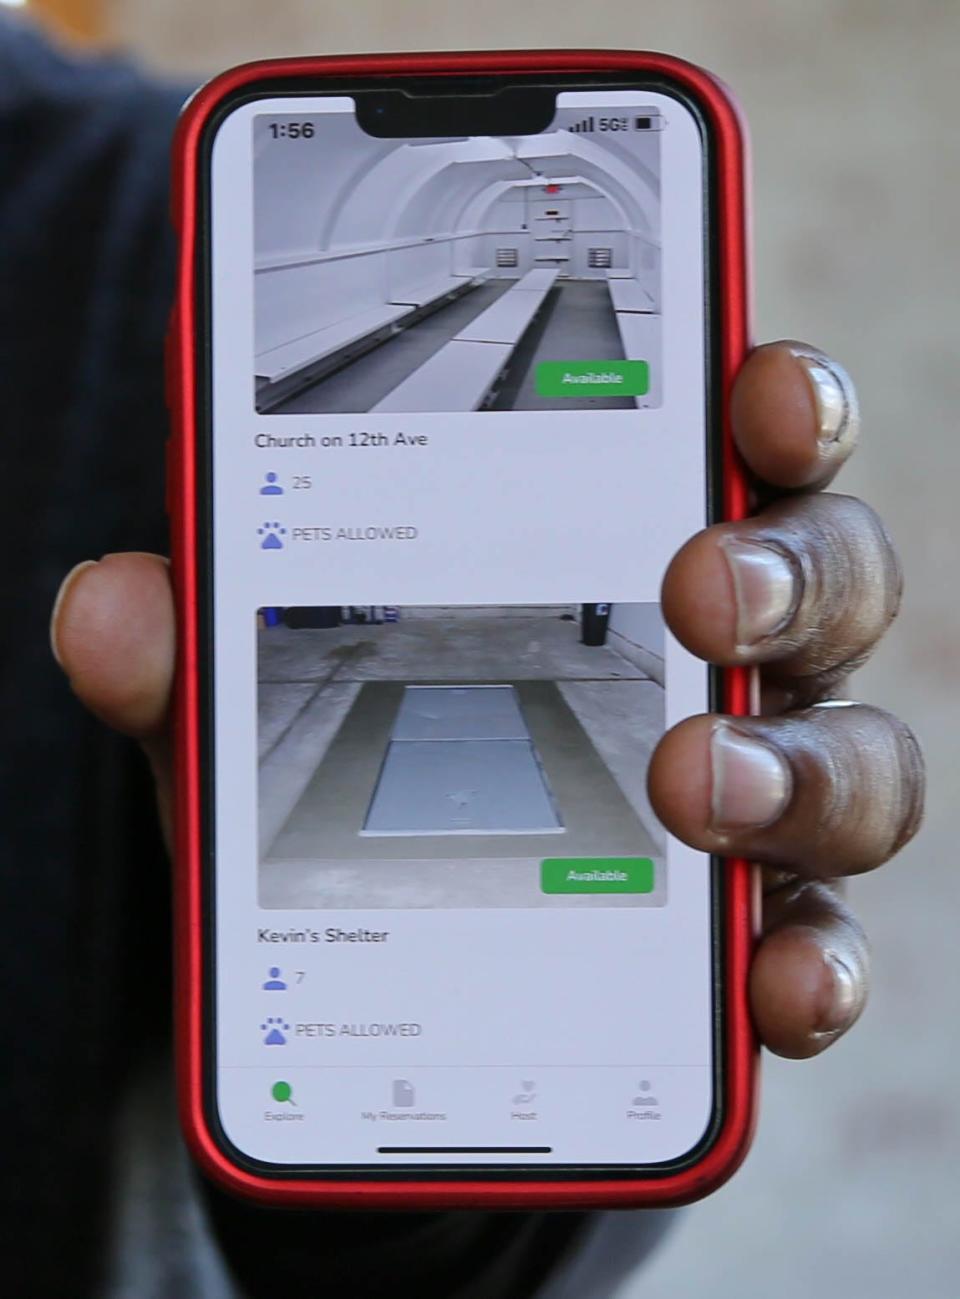 The Shelter Share app, founded by Robert Washington, is a platform that allows OKC residents to connect with others who have a private storm shelter available for reservation.